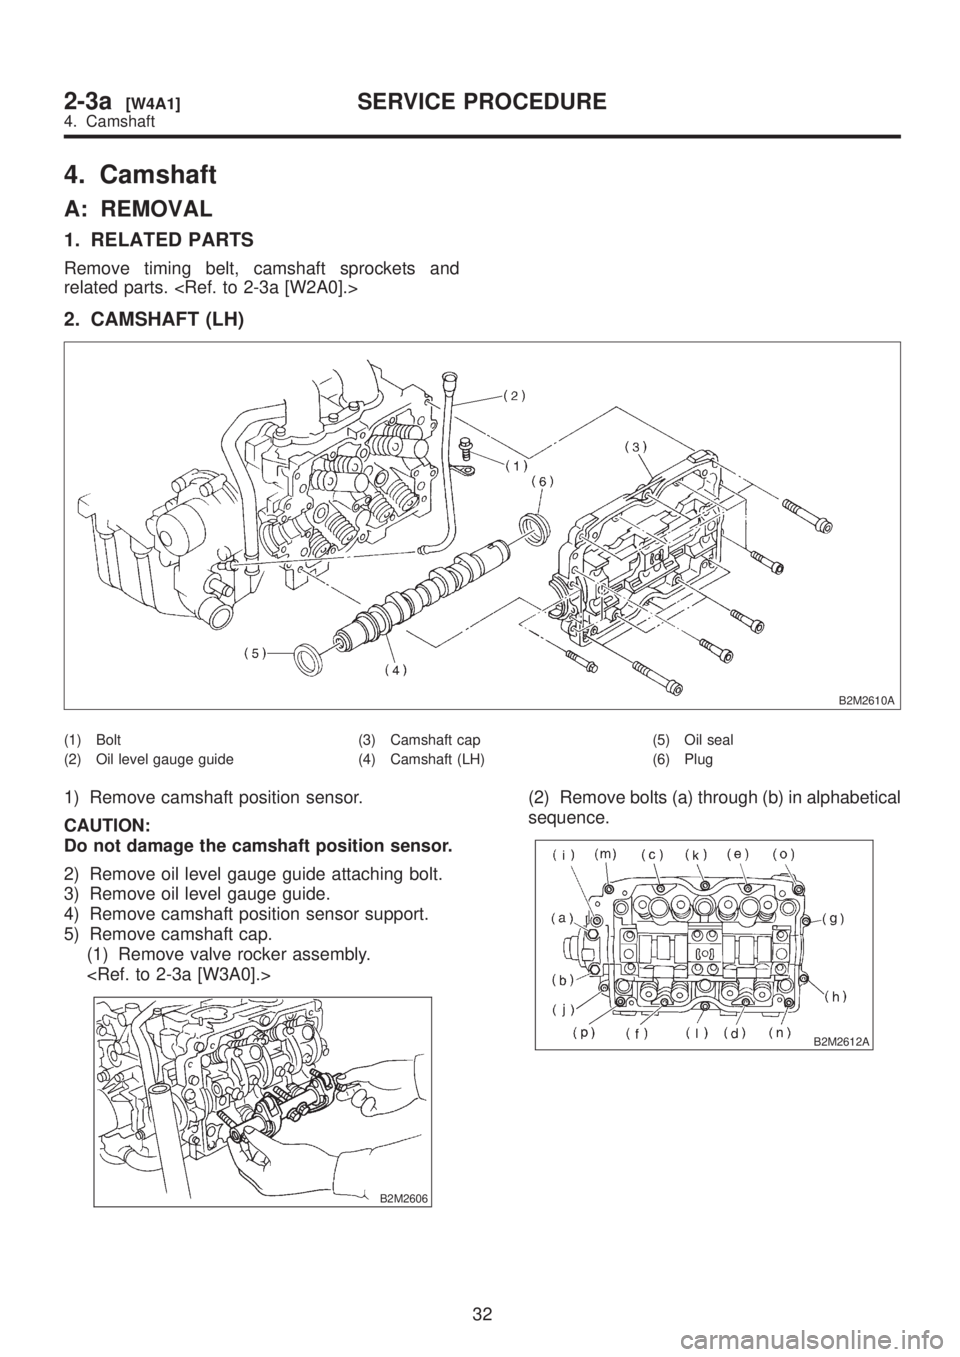 SUBARU LEGACY 1999  Service Repair Manual 4. Camshaft
A: REMOVAL
1. RELATED PARTS
Remove timing belt, camshaft sprockets and
related parts. <Ref. to 2-3a [W2A0].>
2. CAMSHAFT (LH)
B2M2610A
(1) Bolt
(2) Oil level gauge guide(3) Camshaft cap
(4